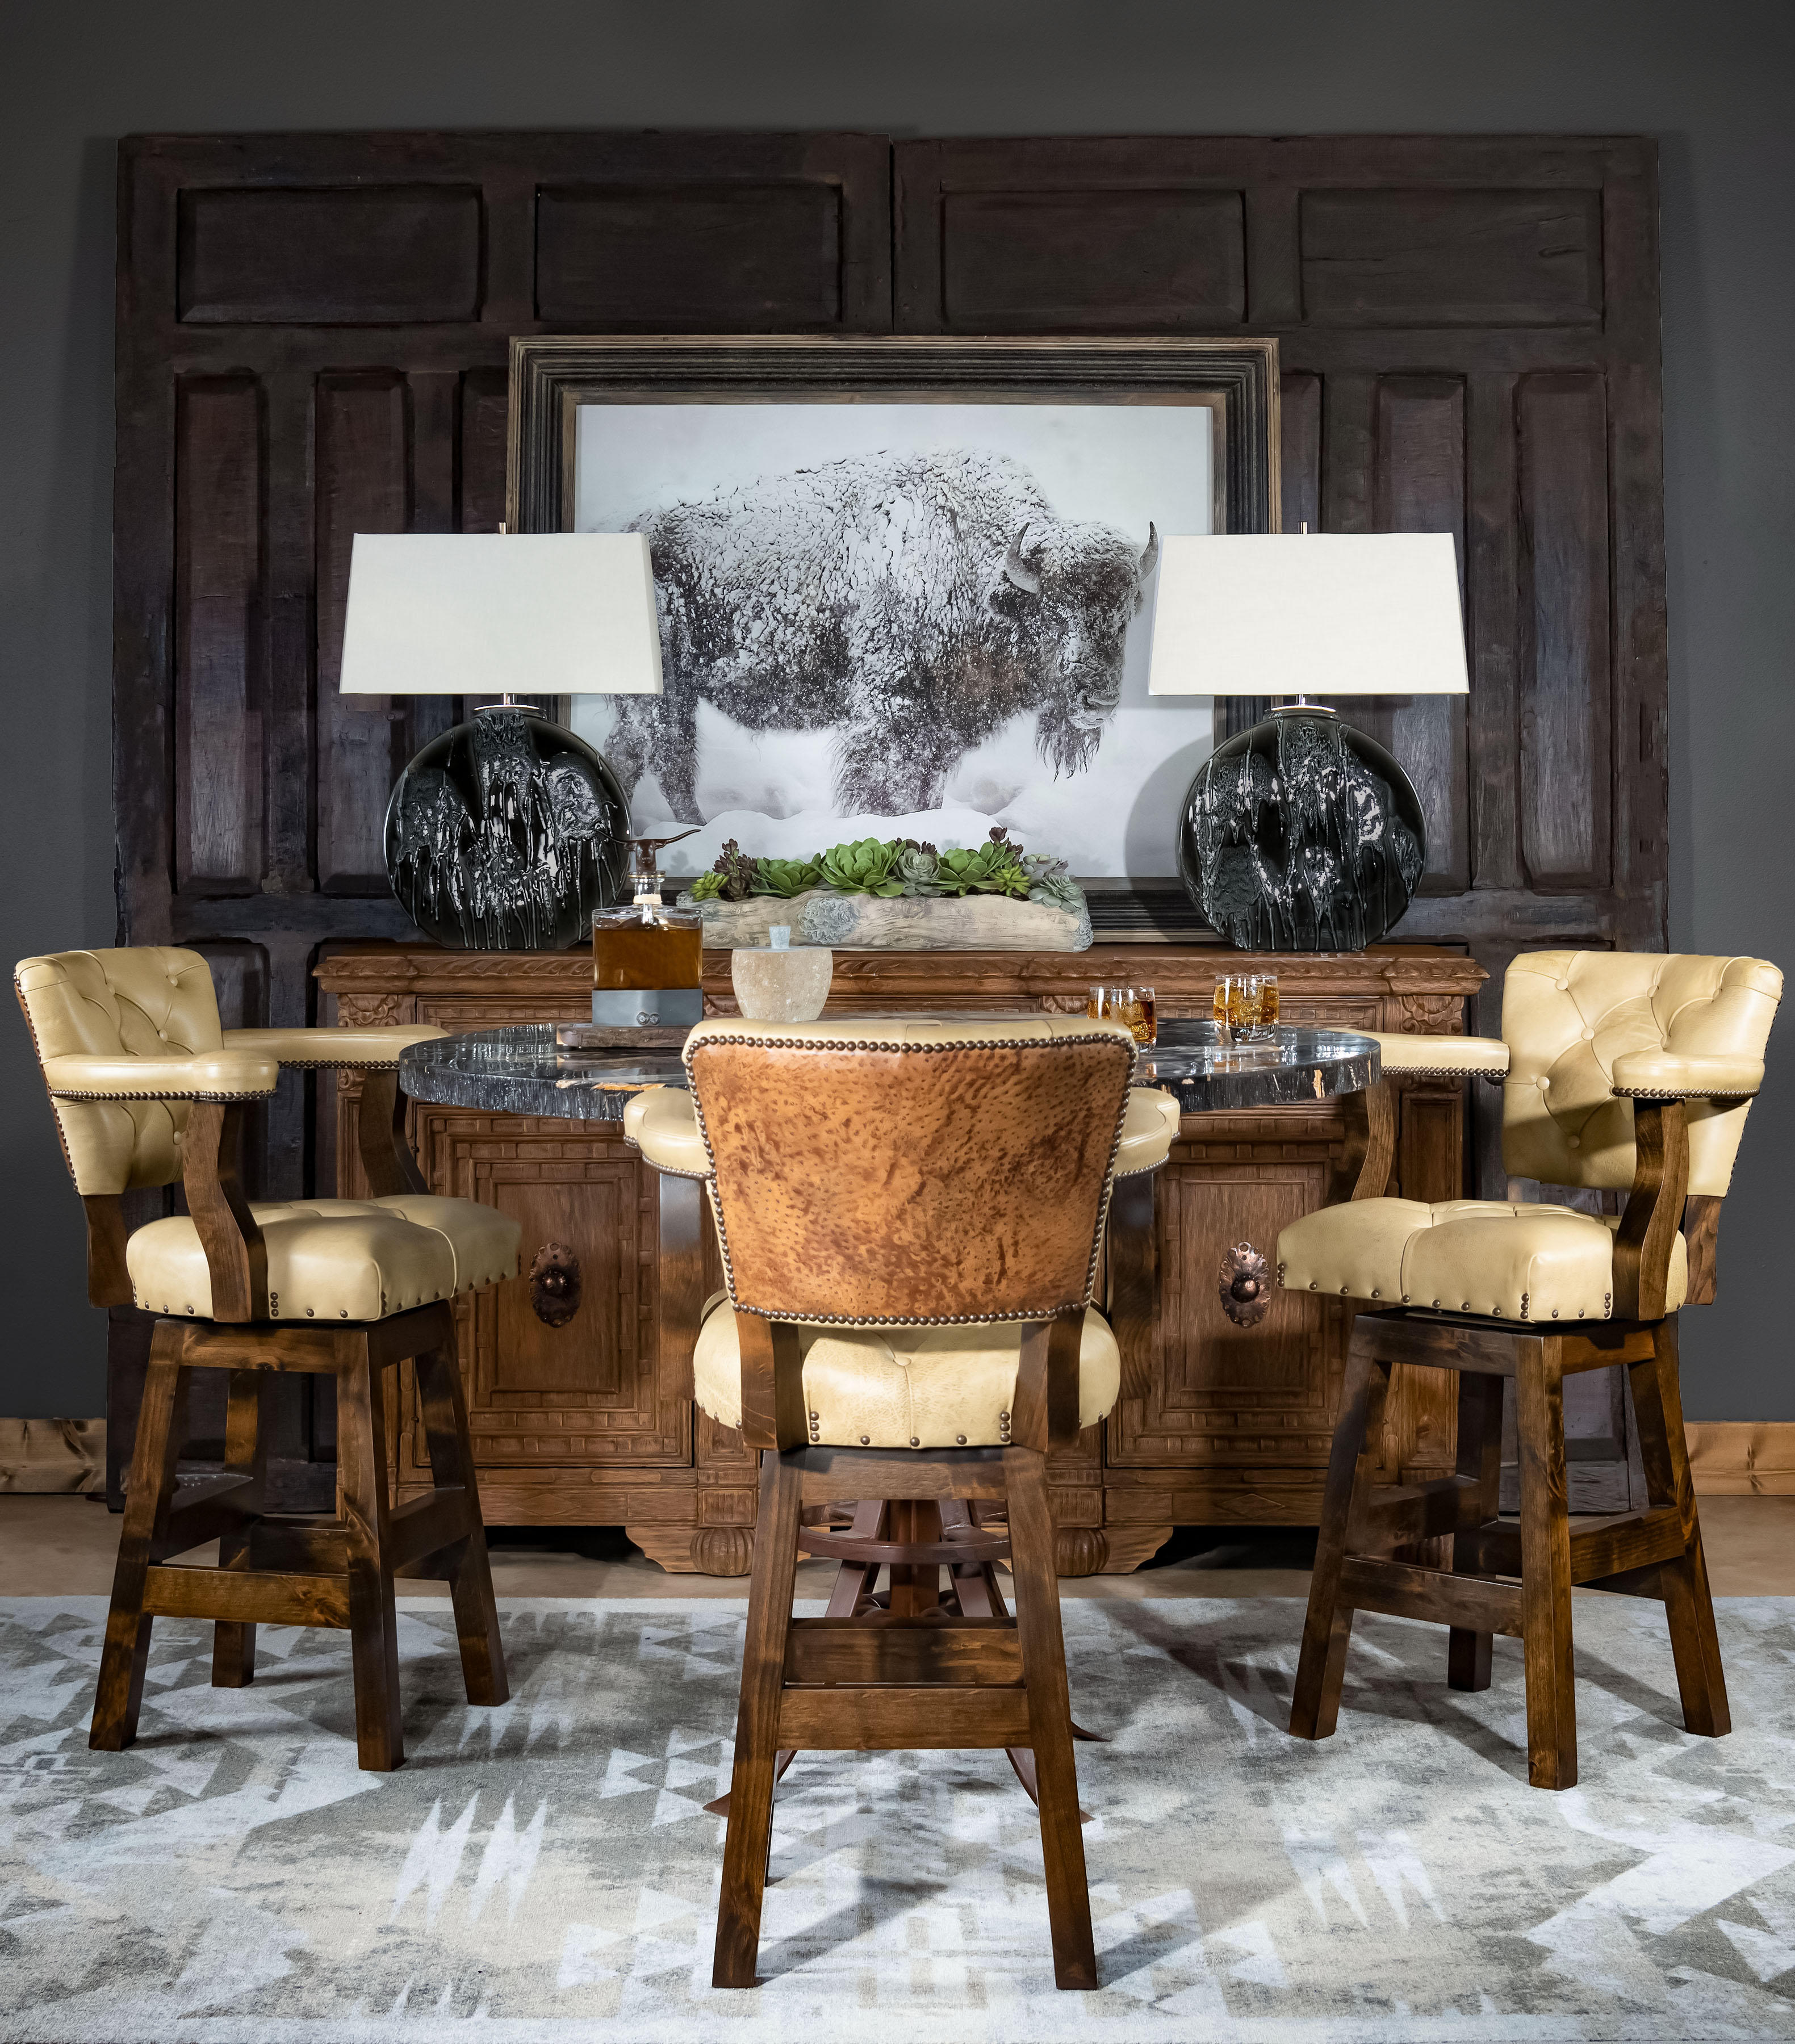 The Chisum Quill Barstool is stunning, not only for its solid hardwood framing, but particularly for its hand burnished-tufted leather with a contrasting ostrich pattern leather on the outback. Crafted to be either bar or counter height, this fine rustic barstool will make a statement in any home dining room or living area. Brass-studded accents and solid hardwood framing provide the perfect motif for this accent piece. The armrests' gentle sloping feature is a juxtaposition to the sturdily squared hard lines of the base of the barstool. All handcrafted and designed, the Chisum Quill Stool provides a uniquely authentic experience and rustic elegant charm to any space. If beauty and charm along with a stand alone character are what you seek, dive into the experience with our Chisum Quill Barstool and bring life to your home. Best as a dynamic set, these barstools are hand made classics for you. 100% American Made to the highest standards of quality and craftsmanship.